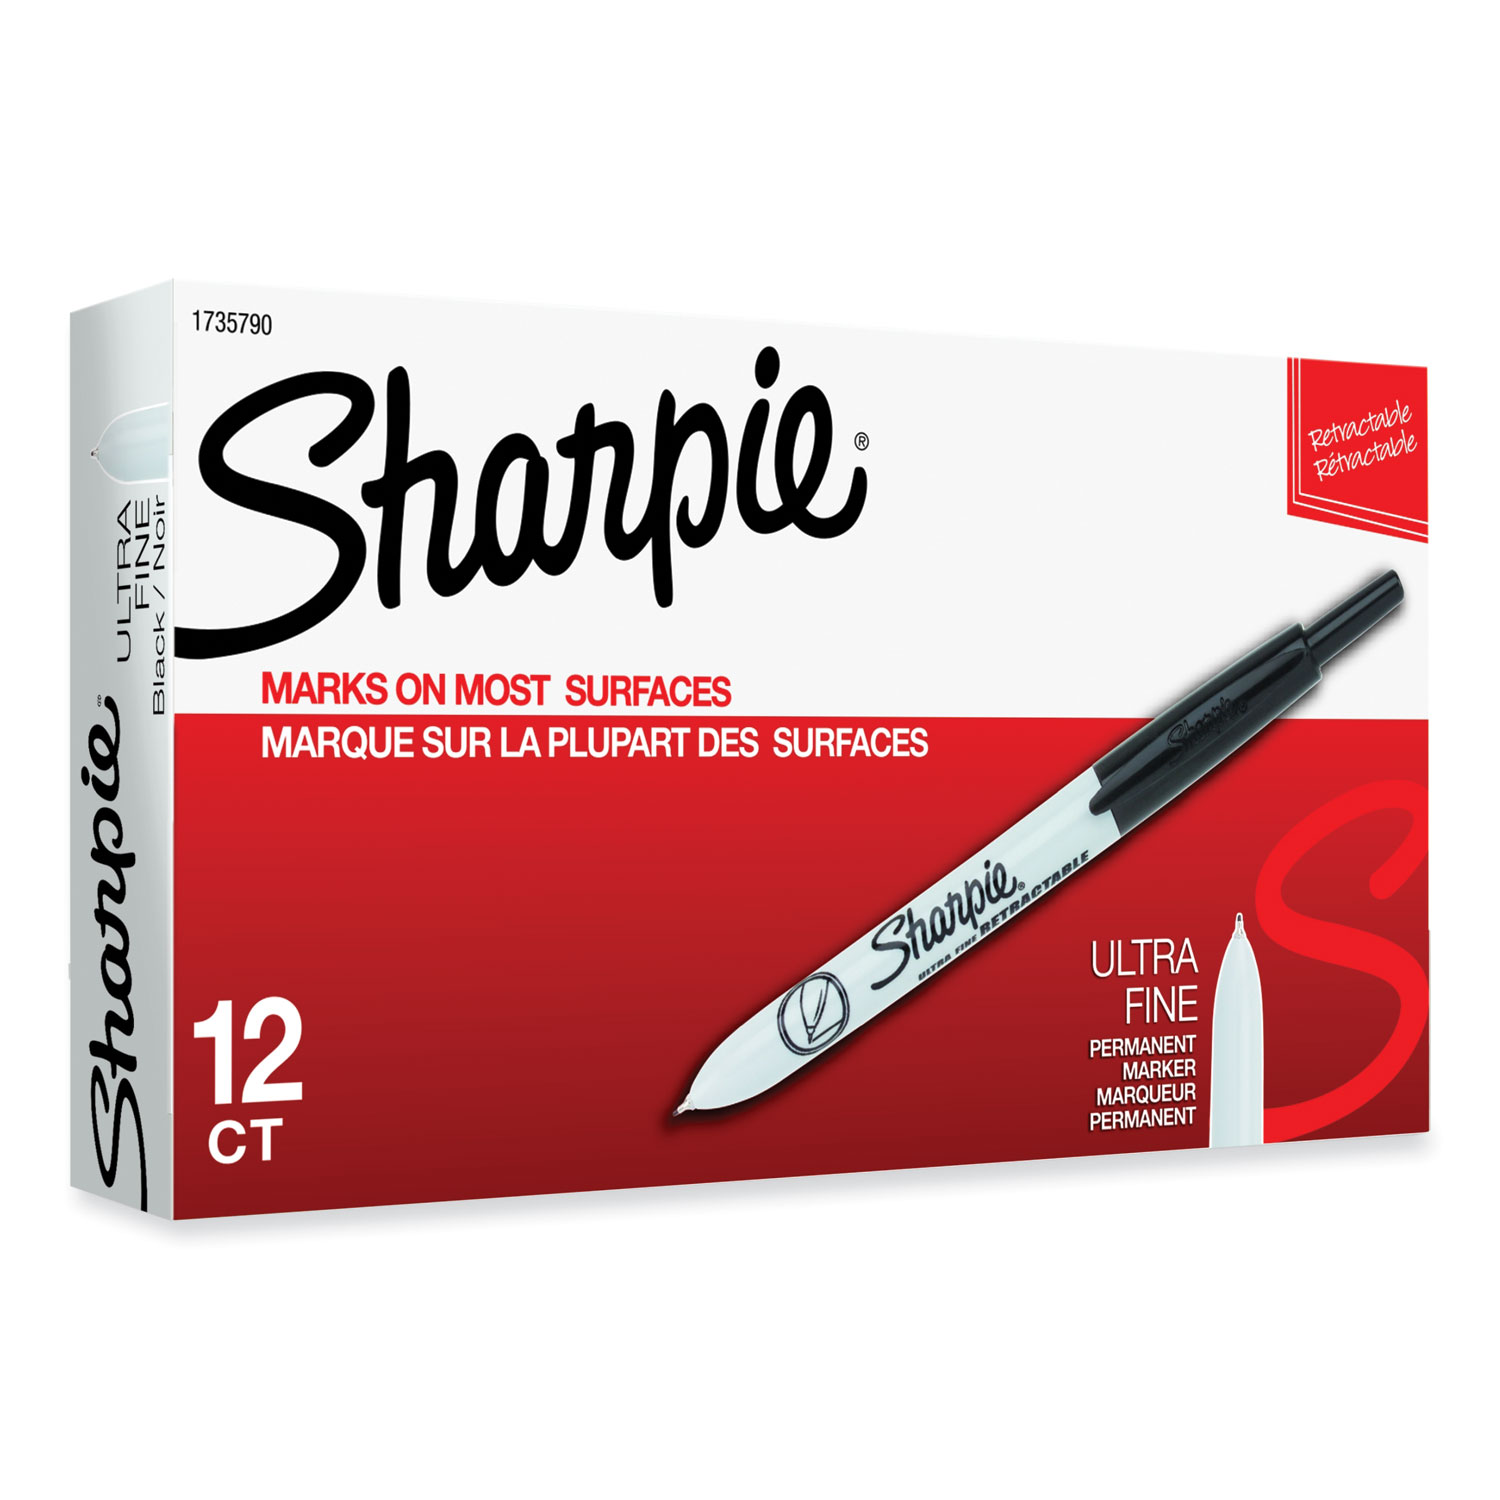 Ultra Fine Tip Permanent Marker, Extra-Fine Needle Tip, Assorted